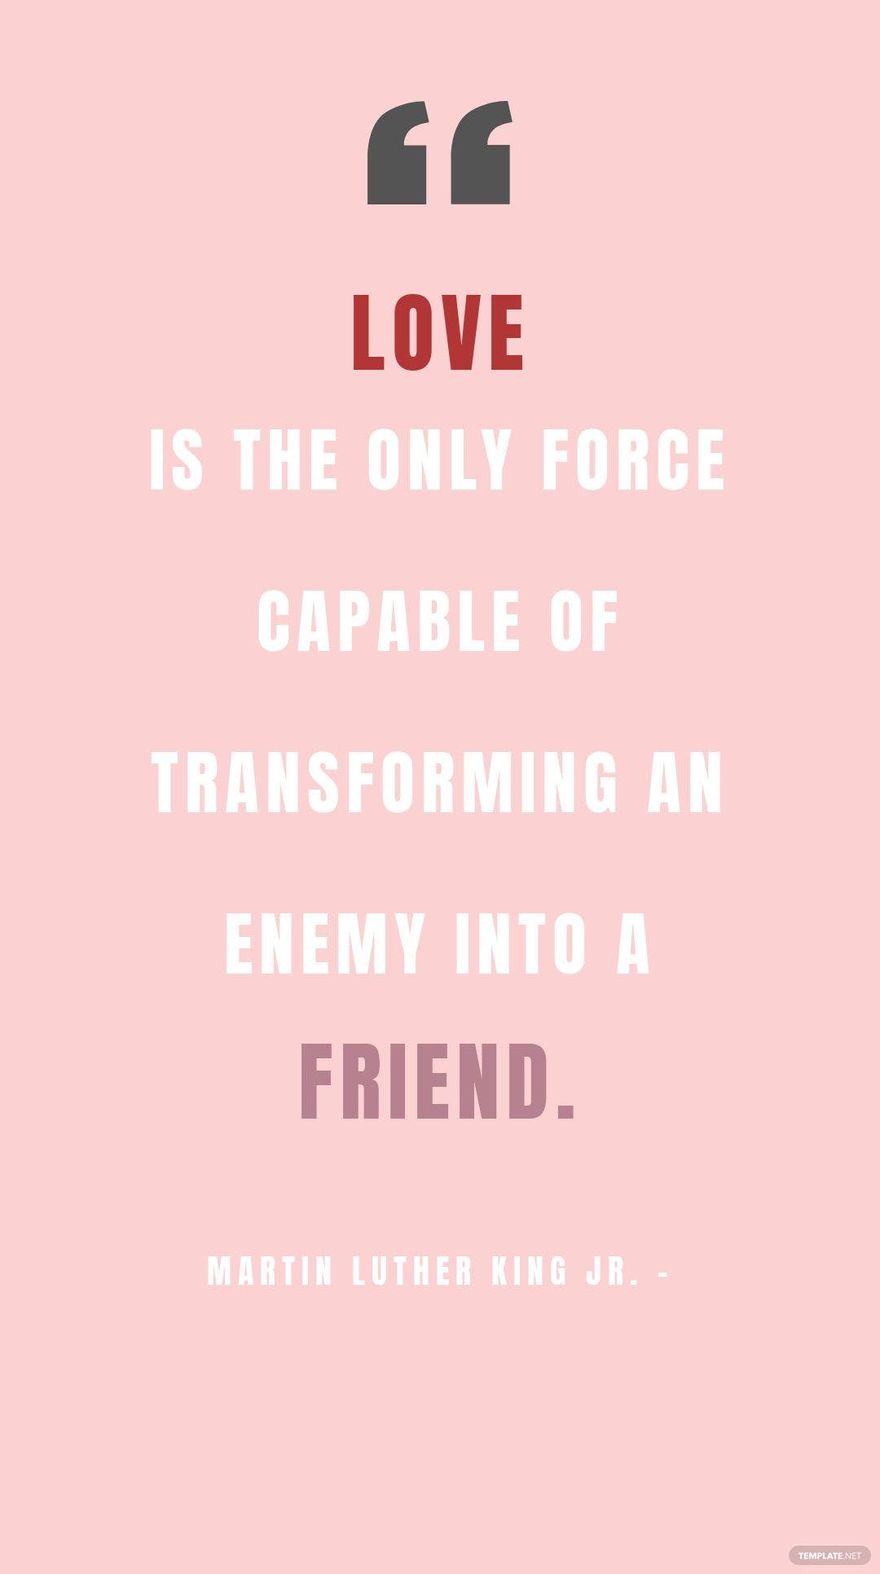 Free Martin Luther King Jr. - Love is the only force capable of transforming an enemy into a friend. in JPG